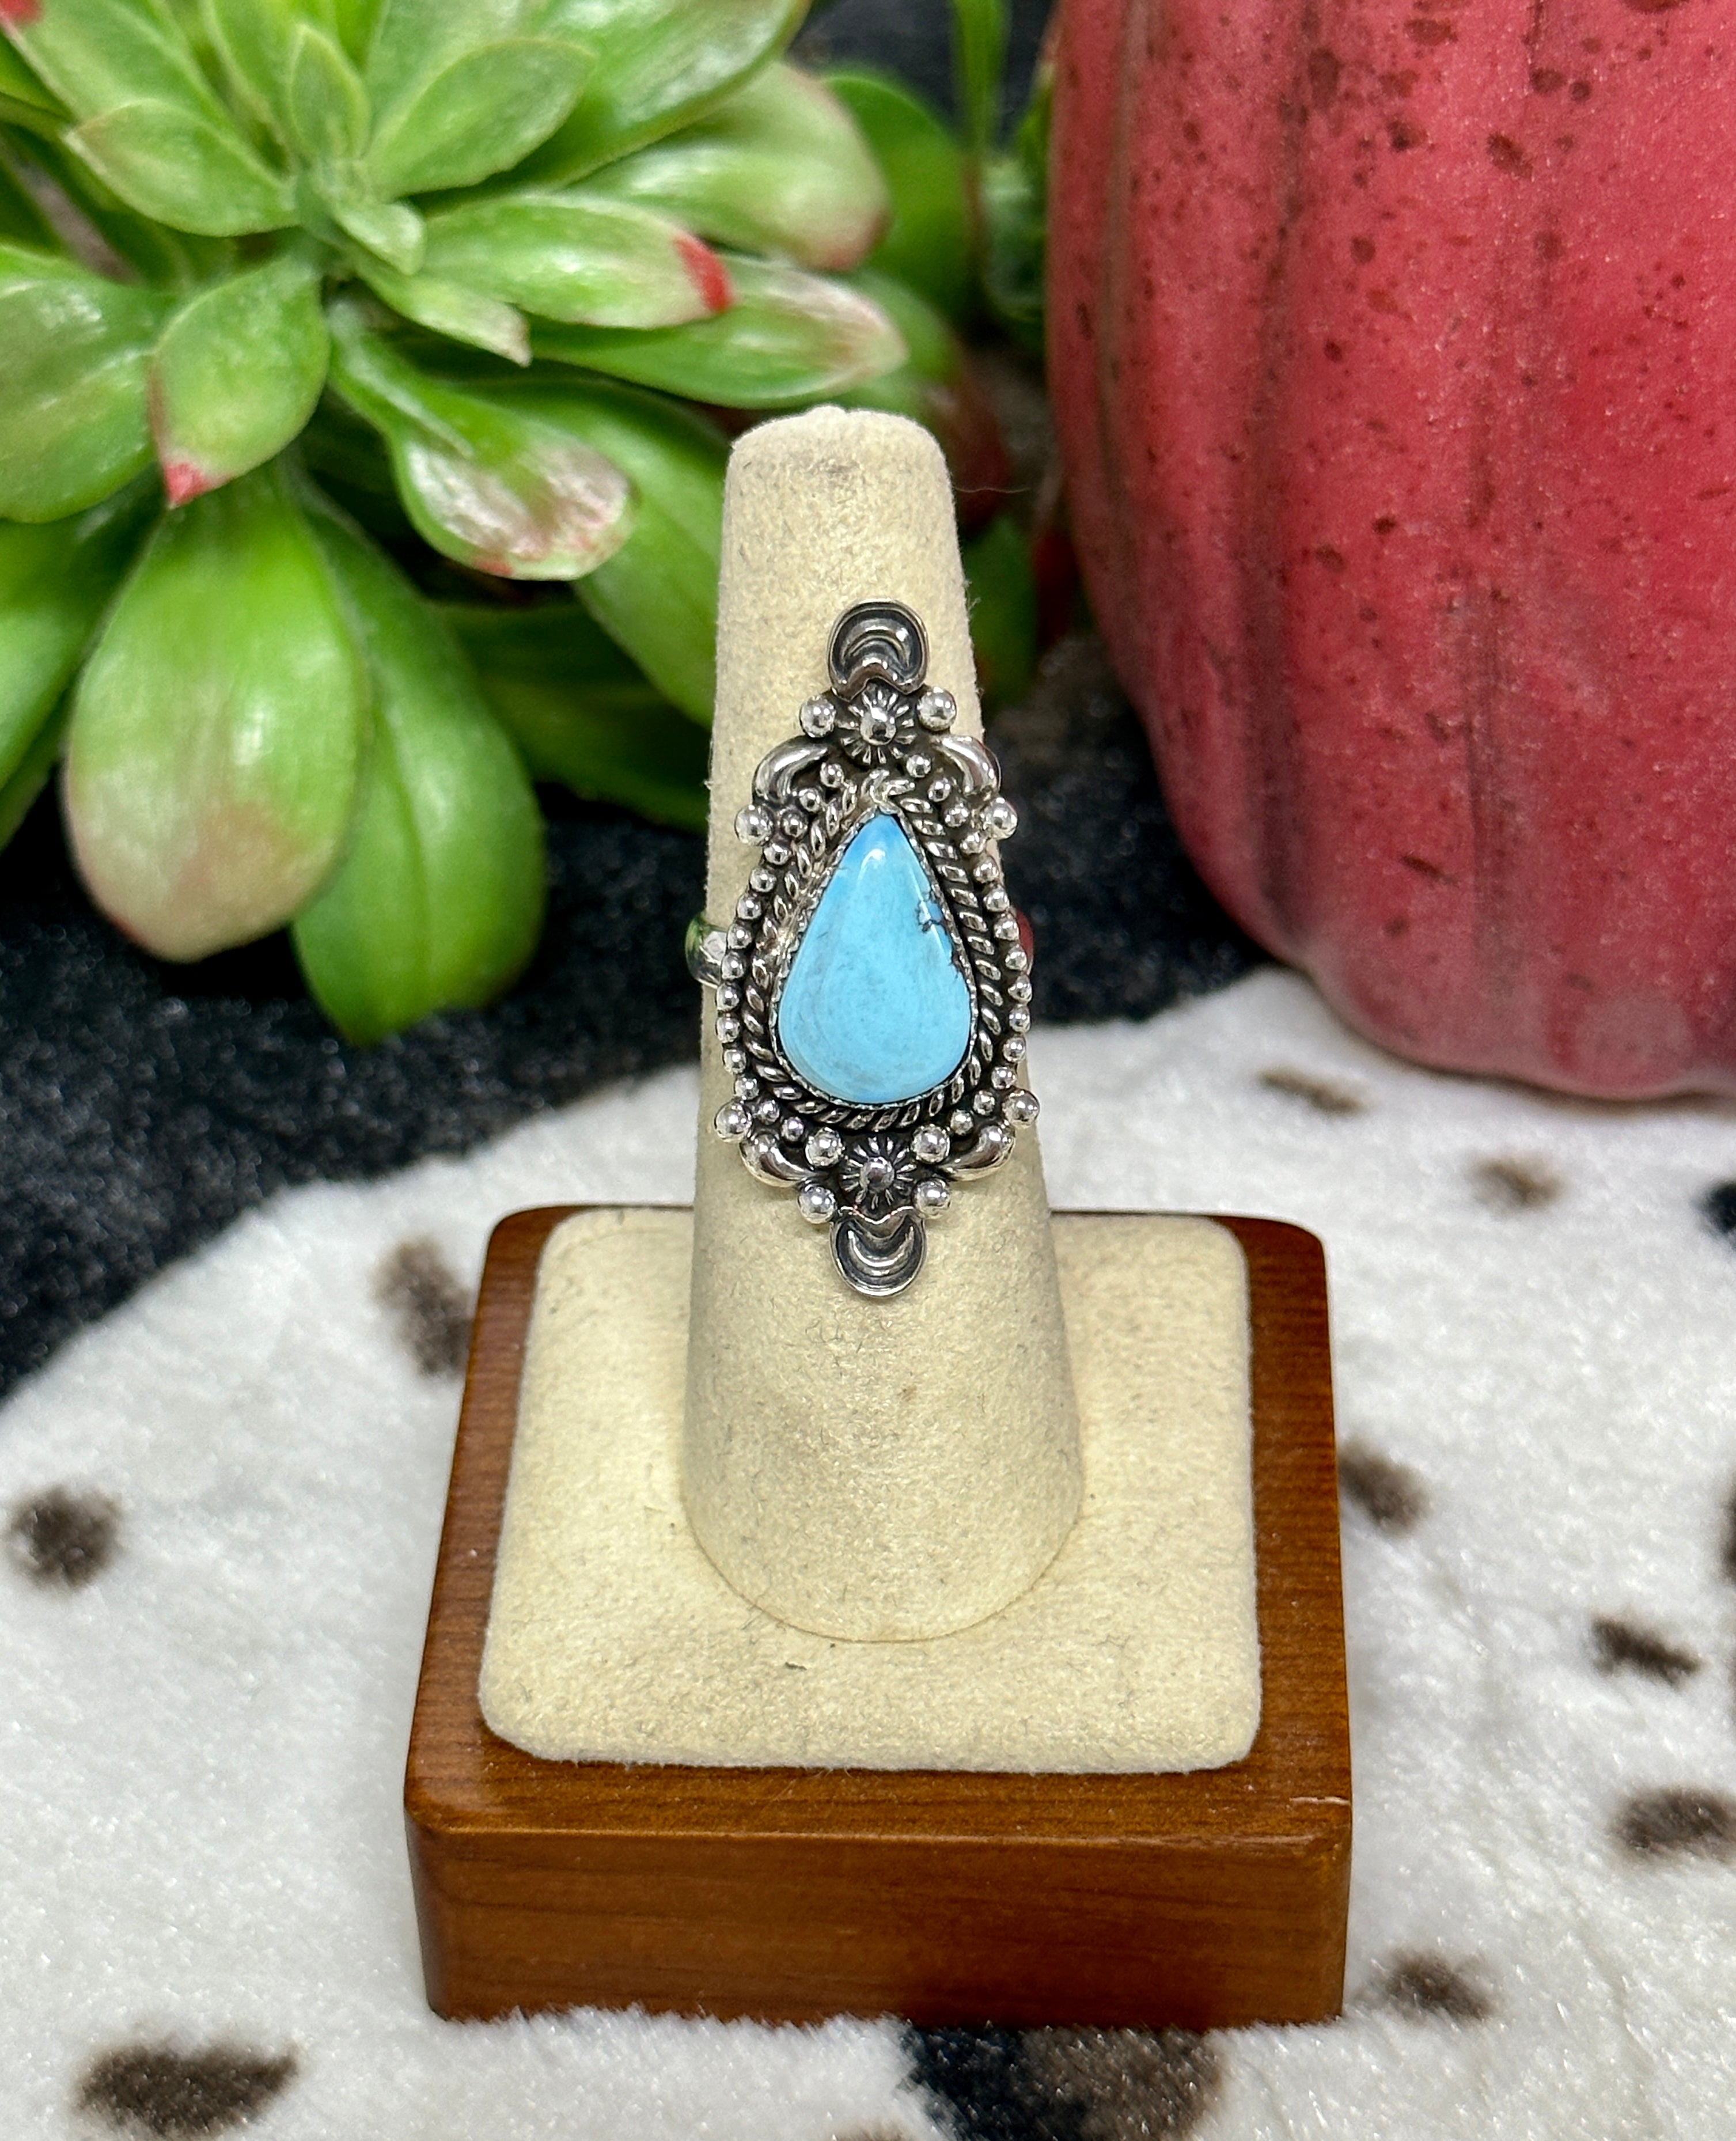 Southwest Handmade Golden Hill’s Turquoise & Sterling Silver Ring Size 5.5